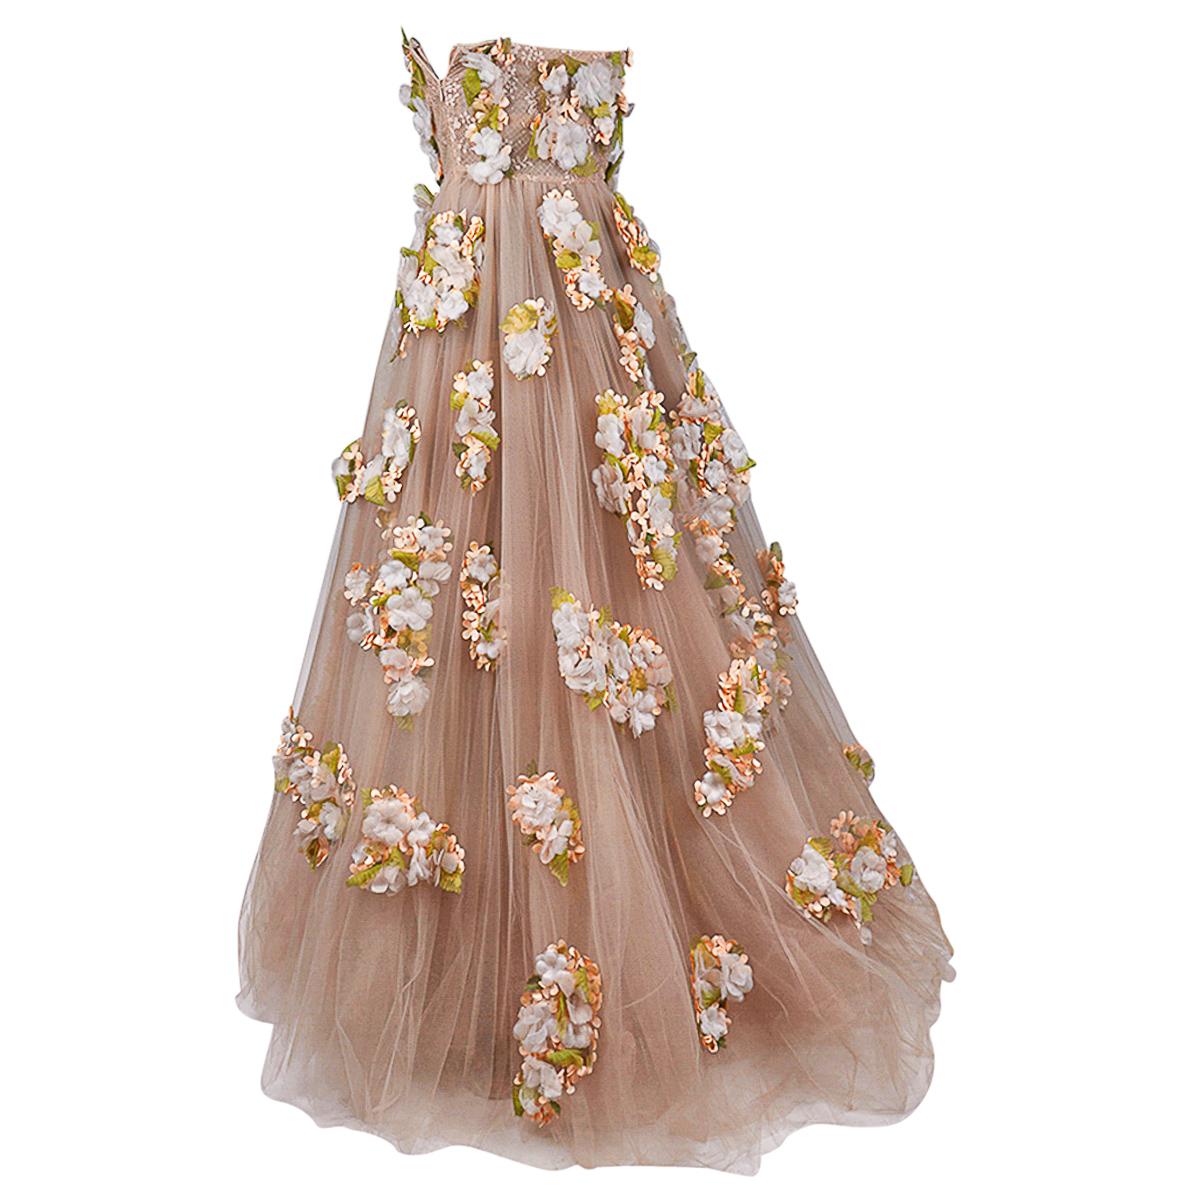 Valentino Strapless Empire Nude Flower Adorned Gown 1 of 2 Size 0 14